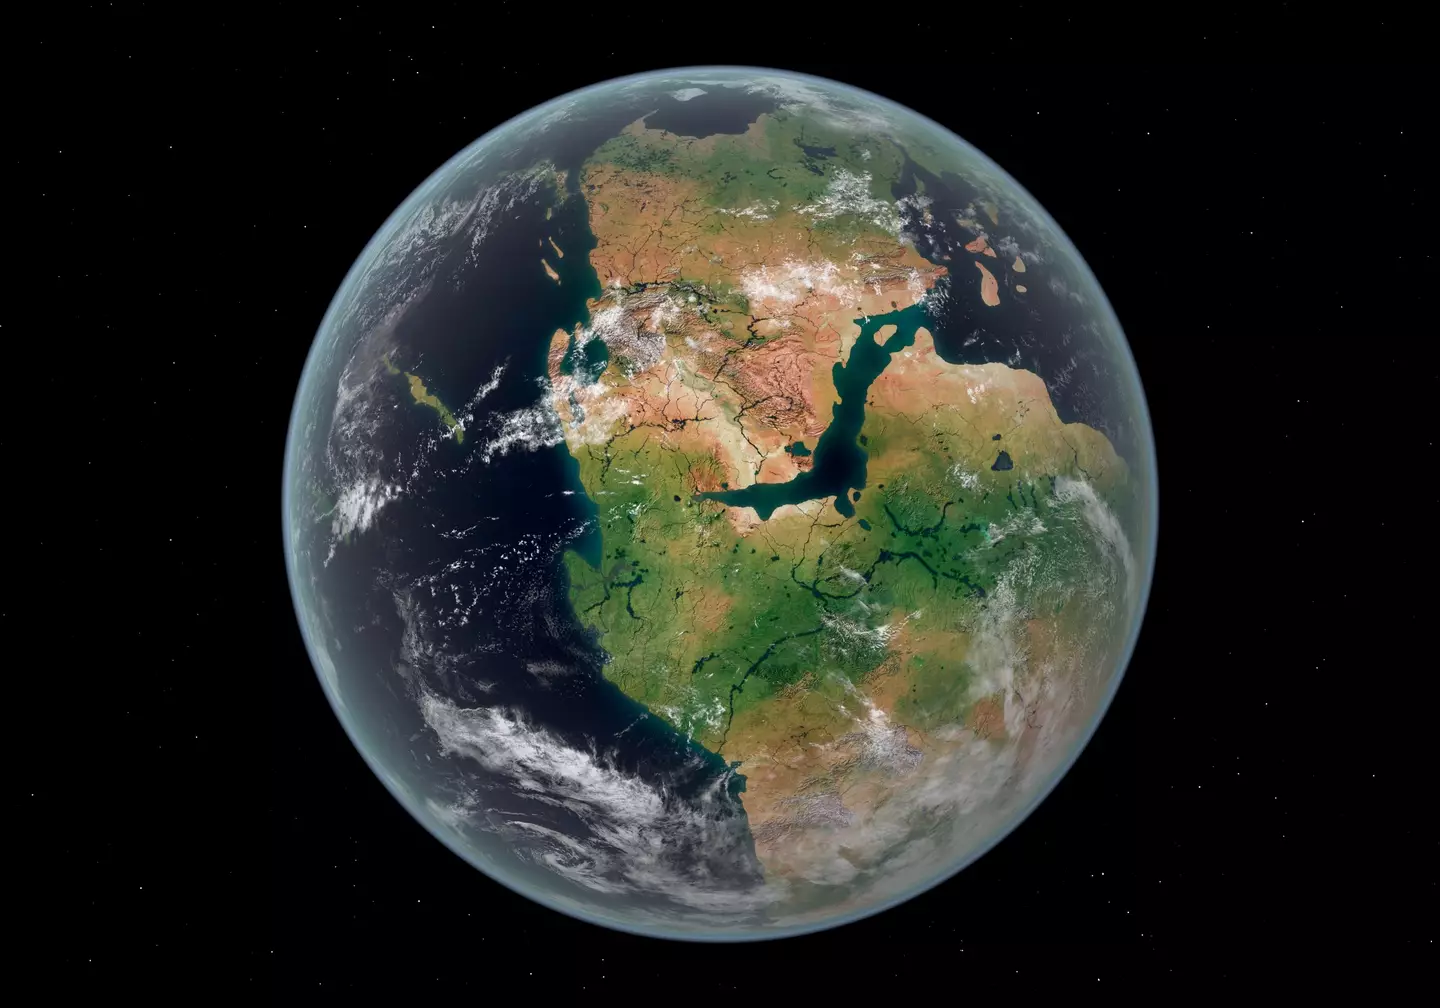 The Earth during the Jurassic period.